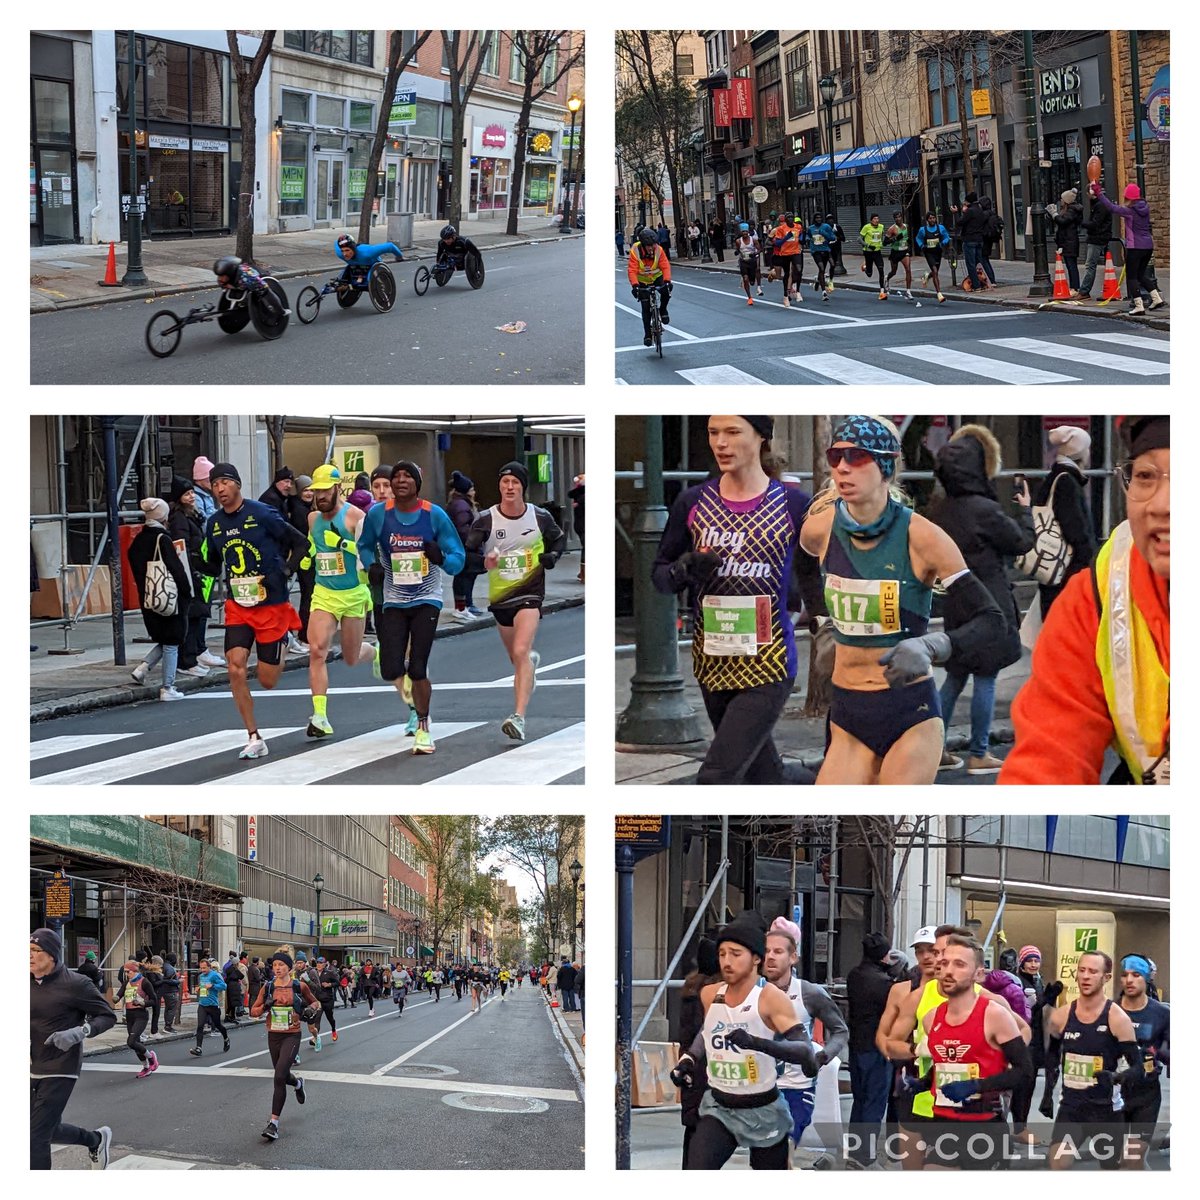 Fun watching Philly Marathon today. It was brutal wind for these guys. This women was first at mile 6.5 where I was watching and she ended up being the first female. Congrats to all the Philly finishers. You all are amazing . 🏃‍♀️🏁🥶😎